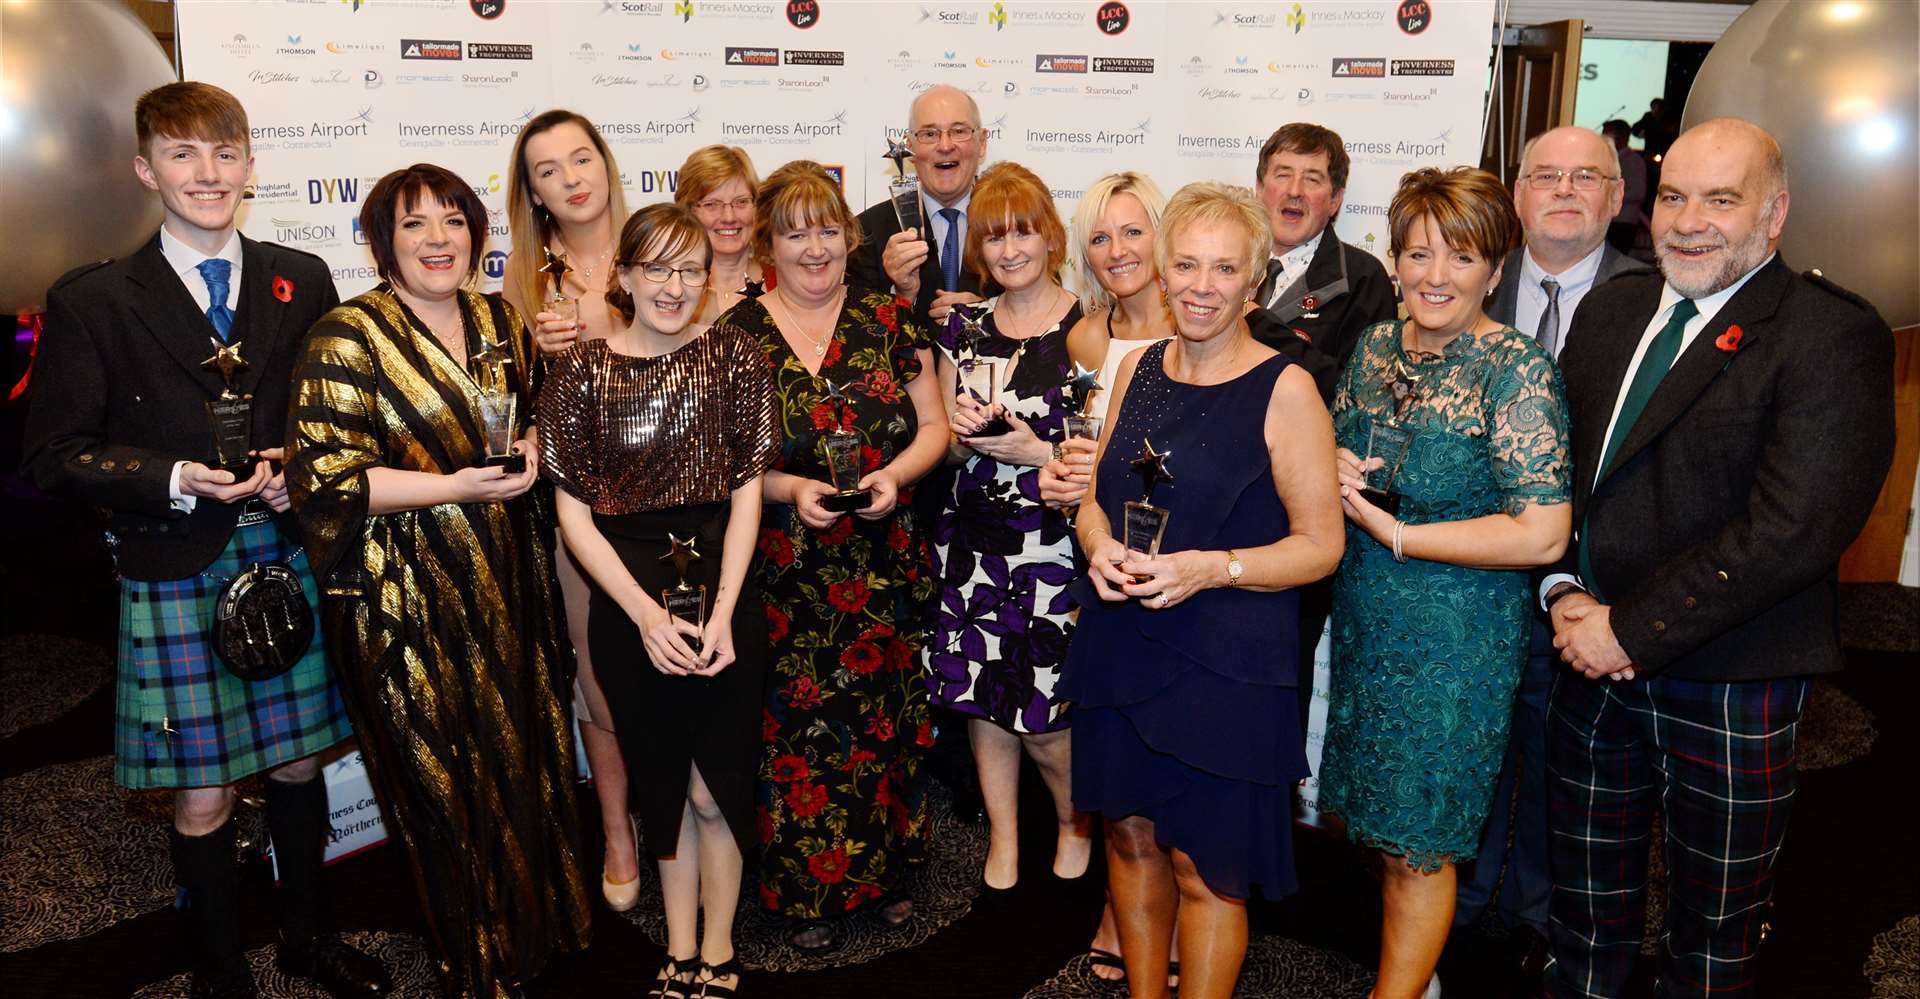 Just some of the Highland Heroes 2019 winners with their trophies.